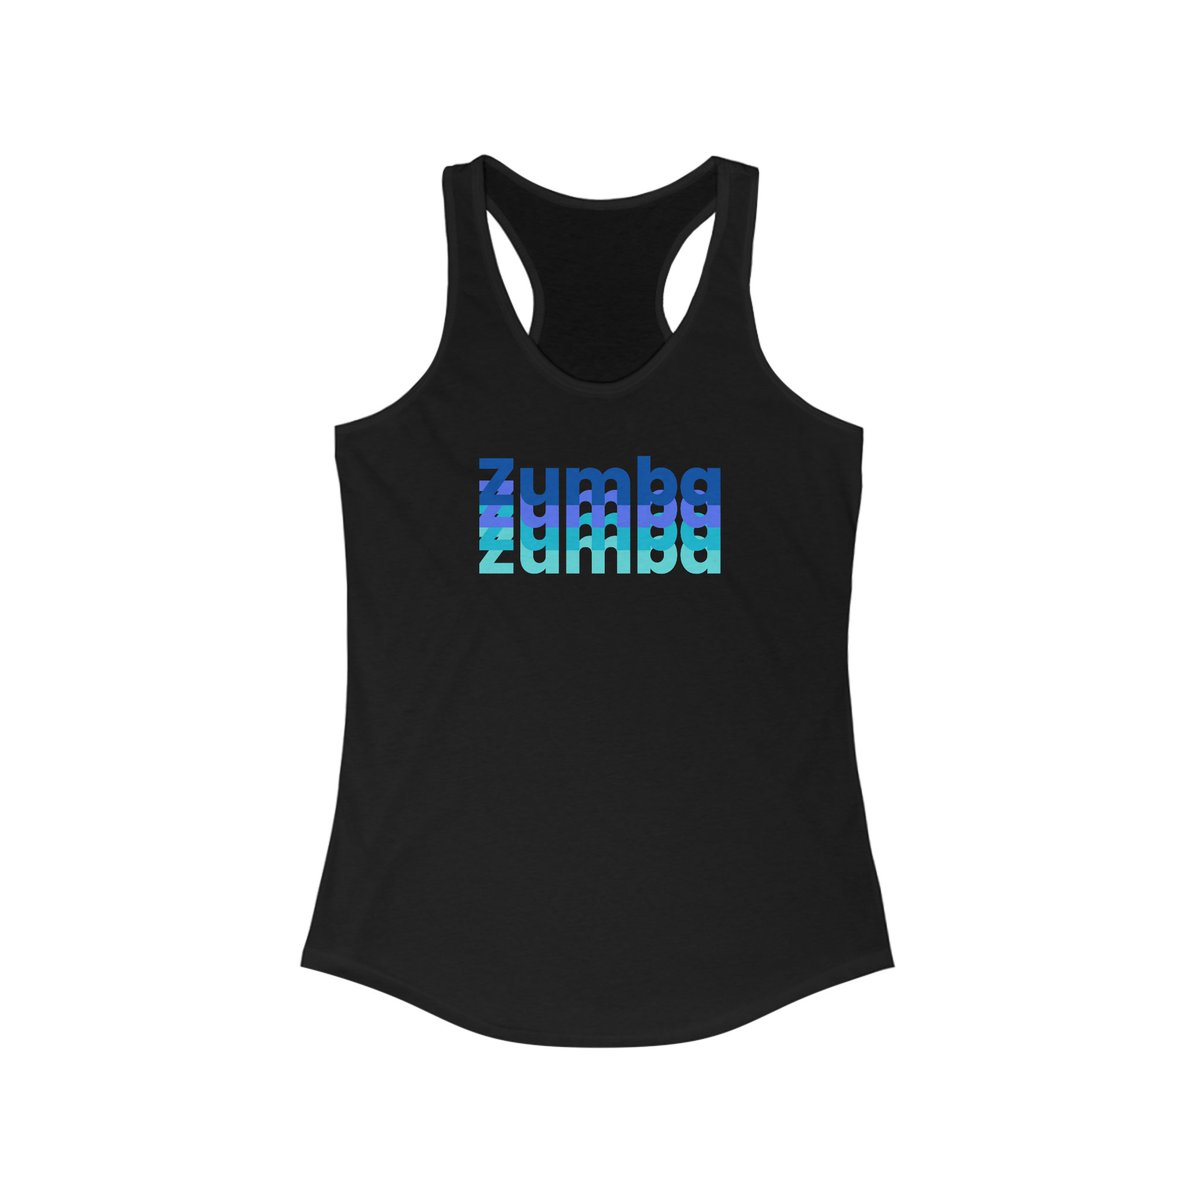 Excited to share the latest addition to my #etsy shop: Dance with Confidence Zumba Racerback Tank, Zumba tank, Racerback top, Dance fitness, Women's activewear ,Workout apparel, Zumba style. etsy.me/43L0WfW #fitnessfashion #dancevibes #sleeksilhouette #breathab